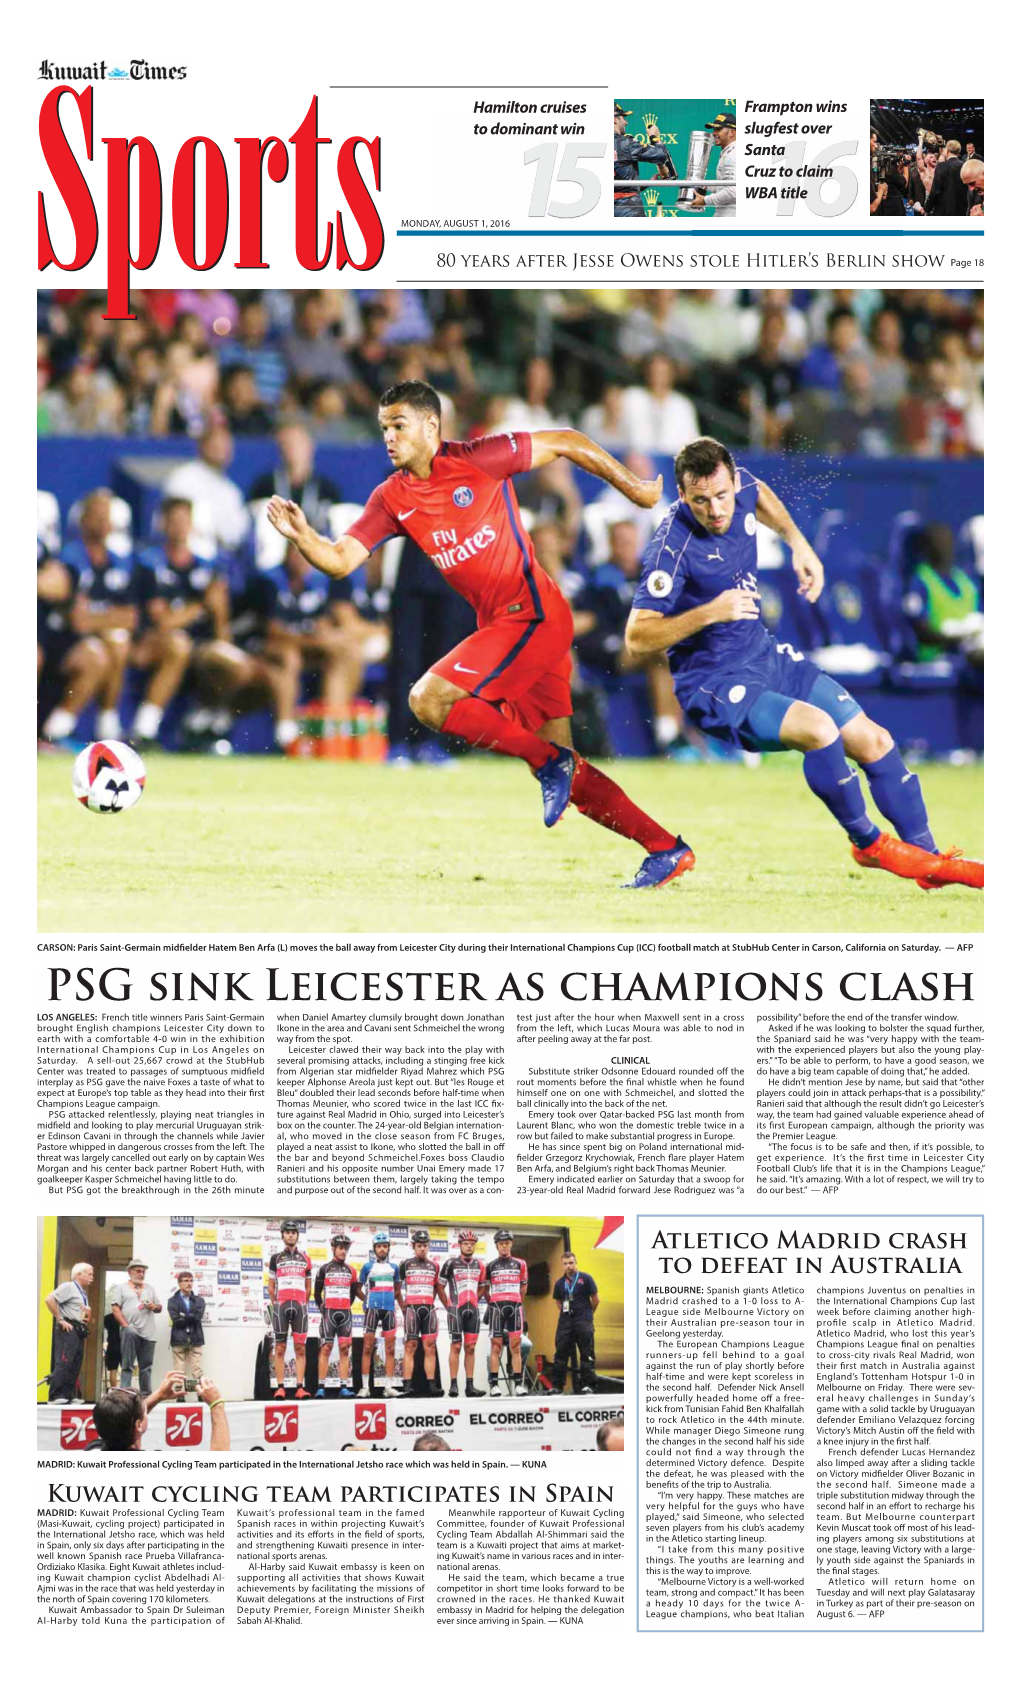 PSG Sink Leicester As Champions Clash